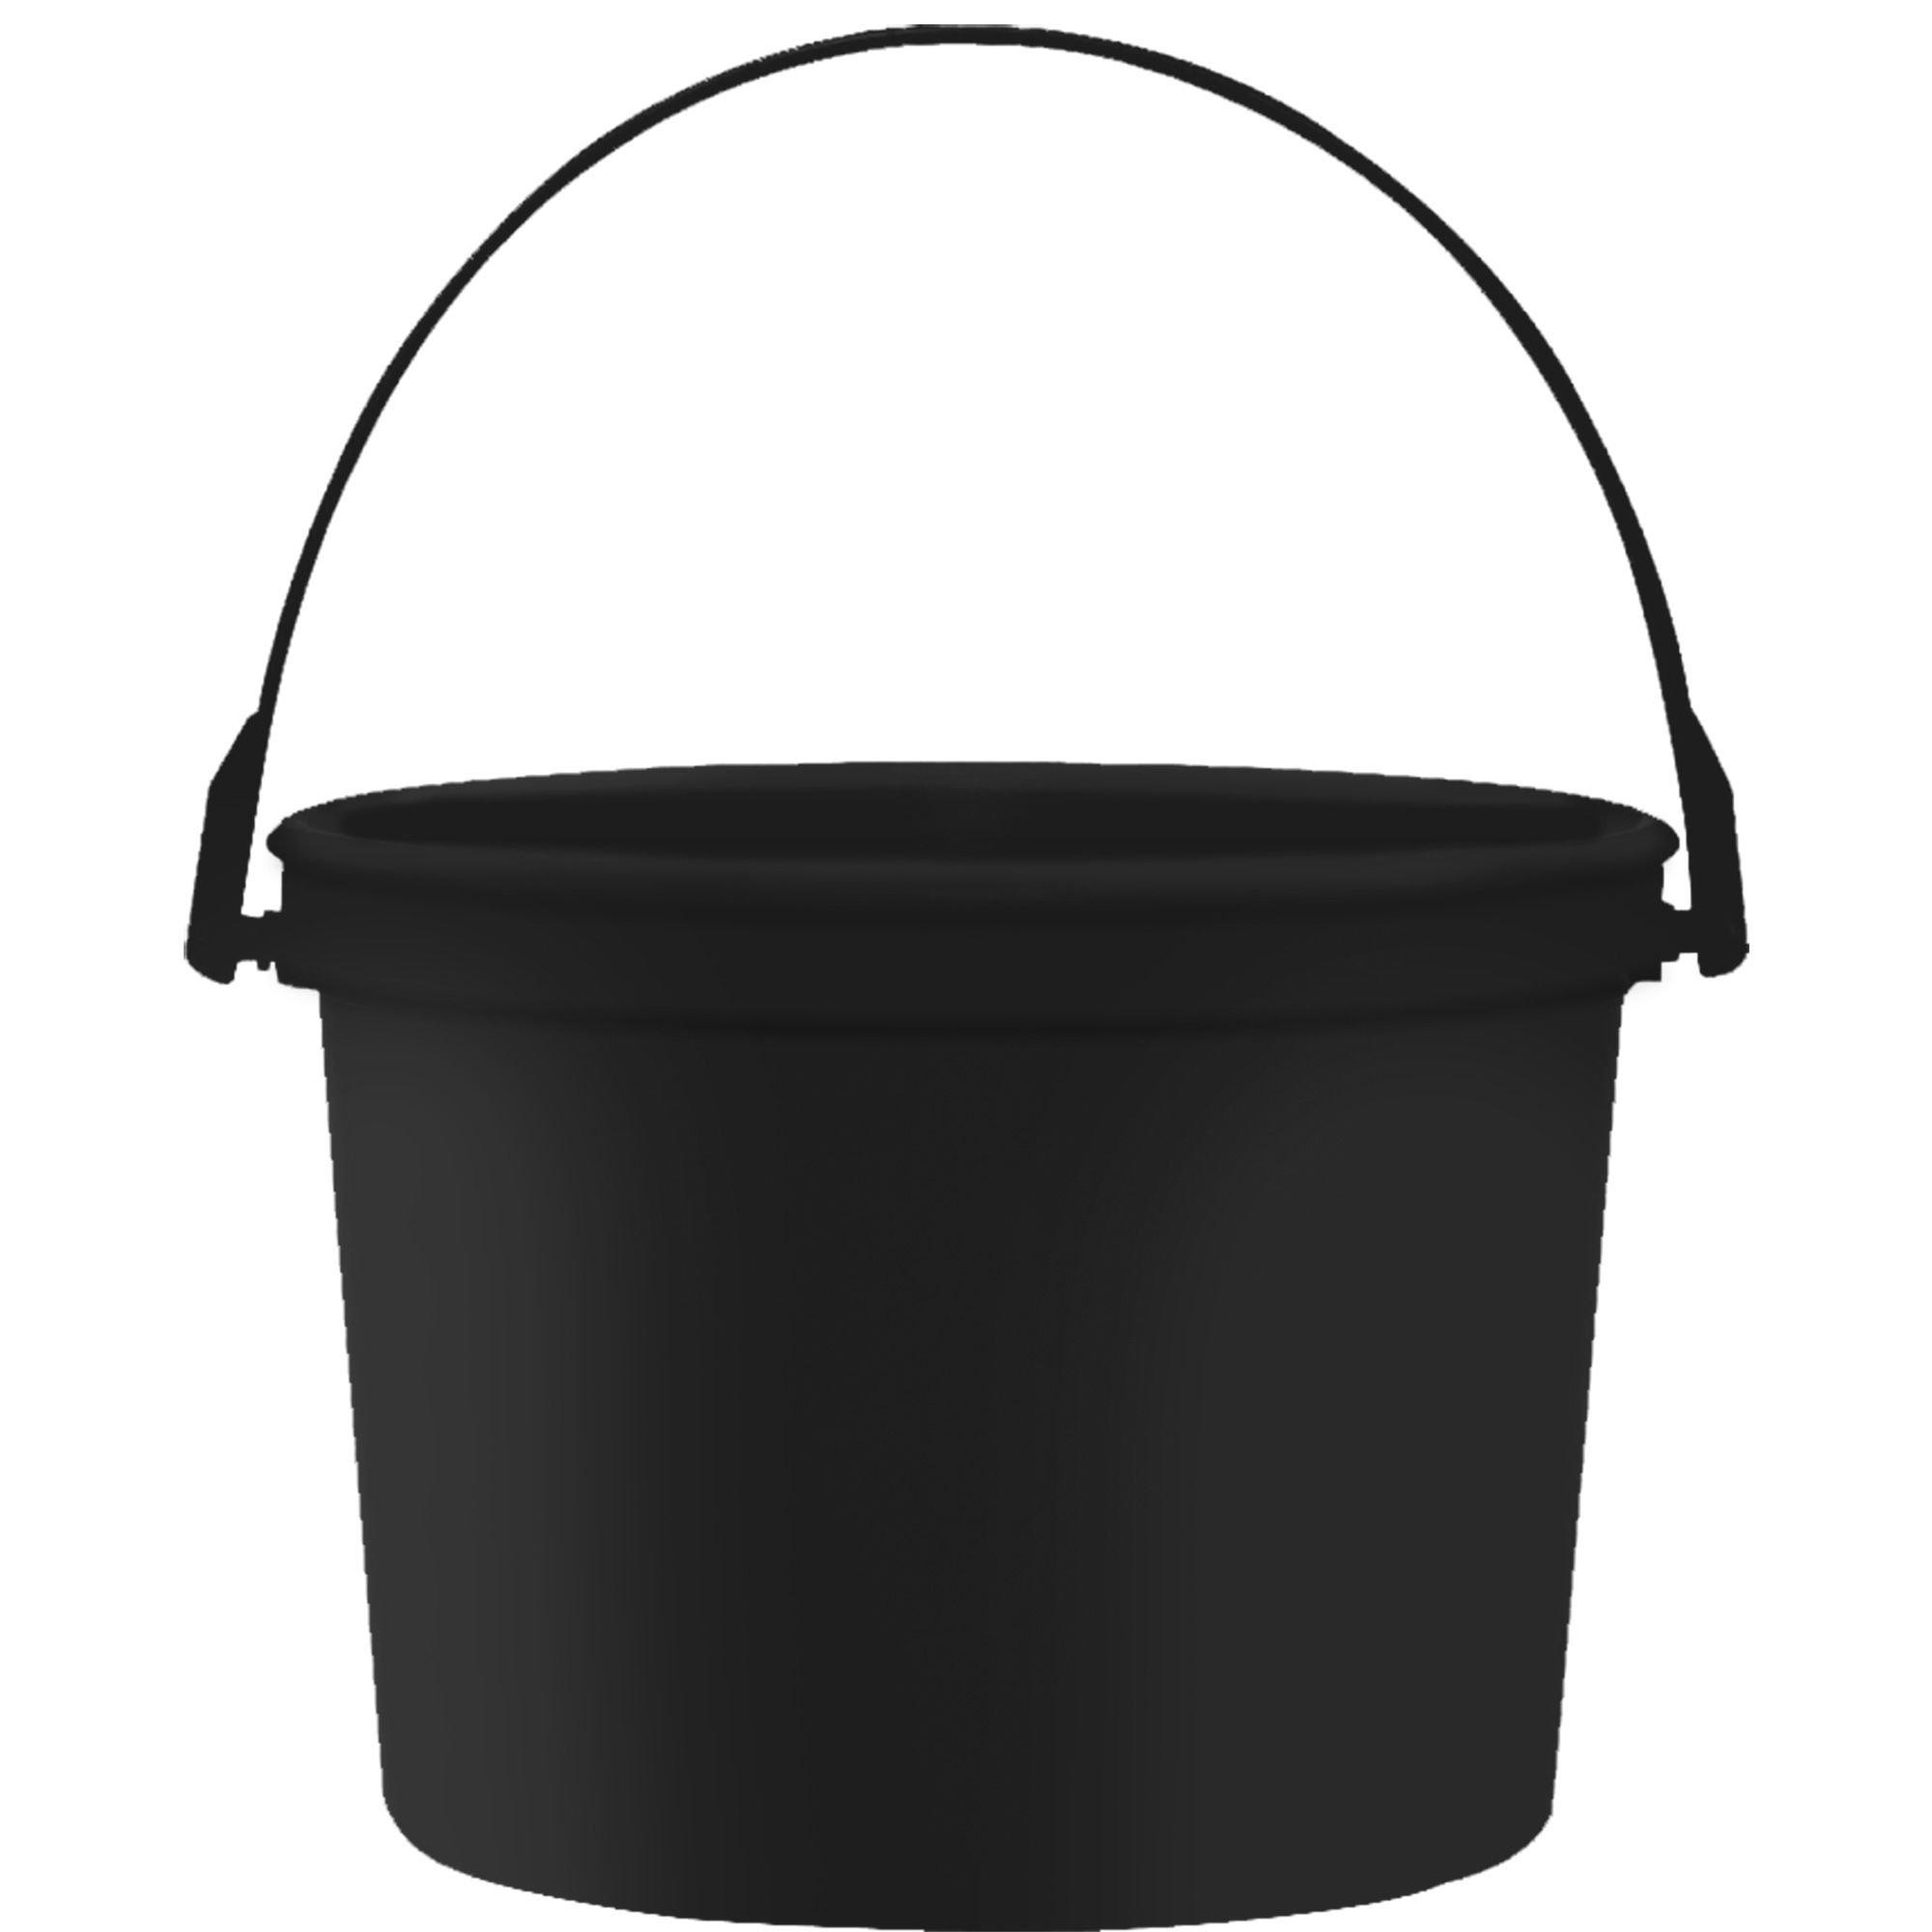 Black Economy Square 4 Gallon Plastic Bucket, 18 Pack<br><font  color=#FF0000>Free Shipping</font>